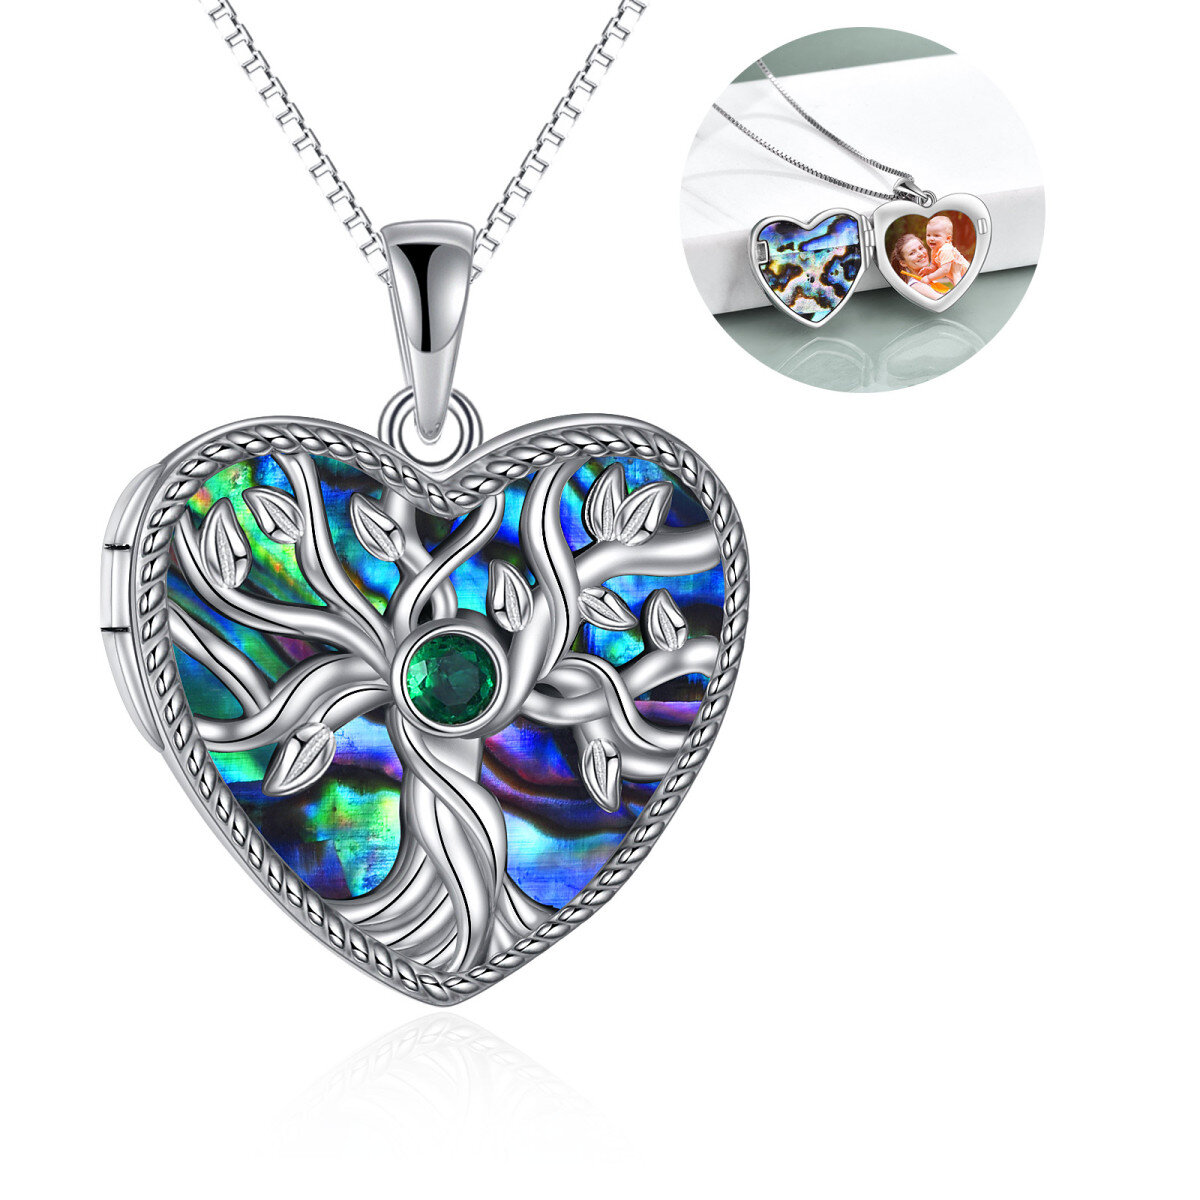 Sterling Silver Tree Of Life Personalized Photo Locket Necklace with Engraved Word-1